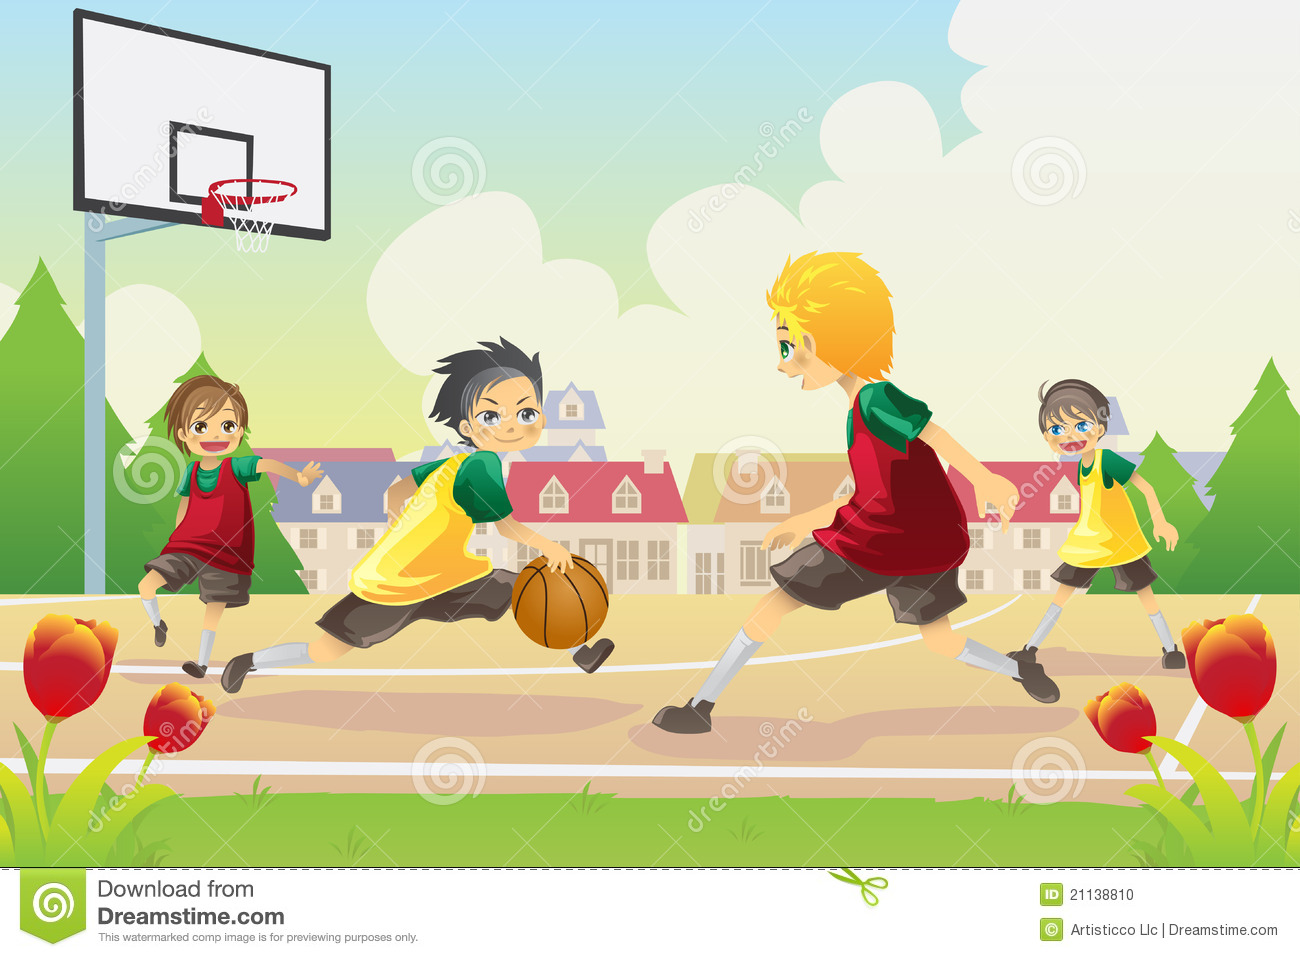 Vector Illustration Of Kids Playing Basketball In The Suburban Area